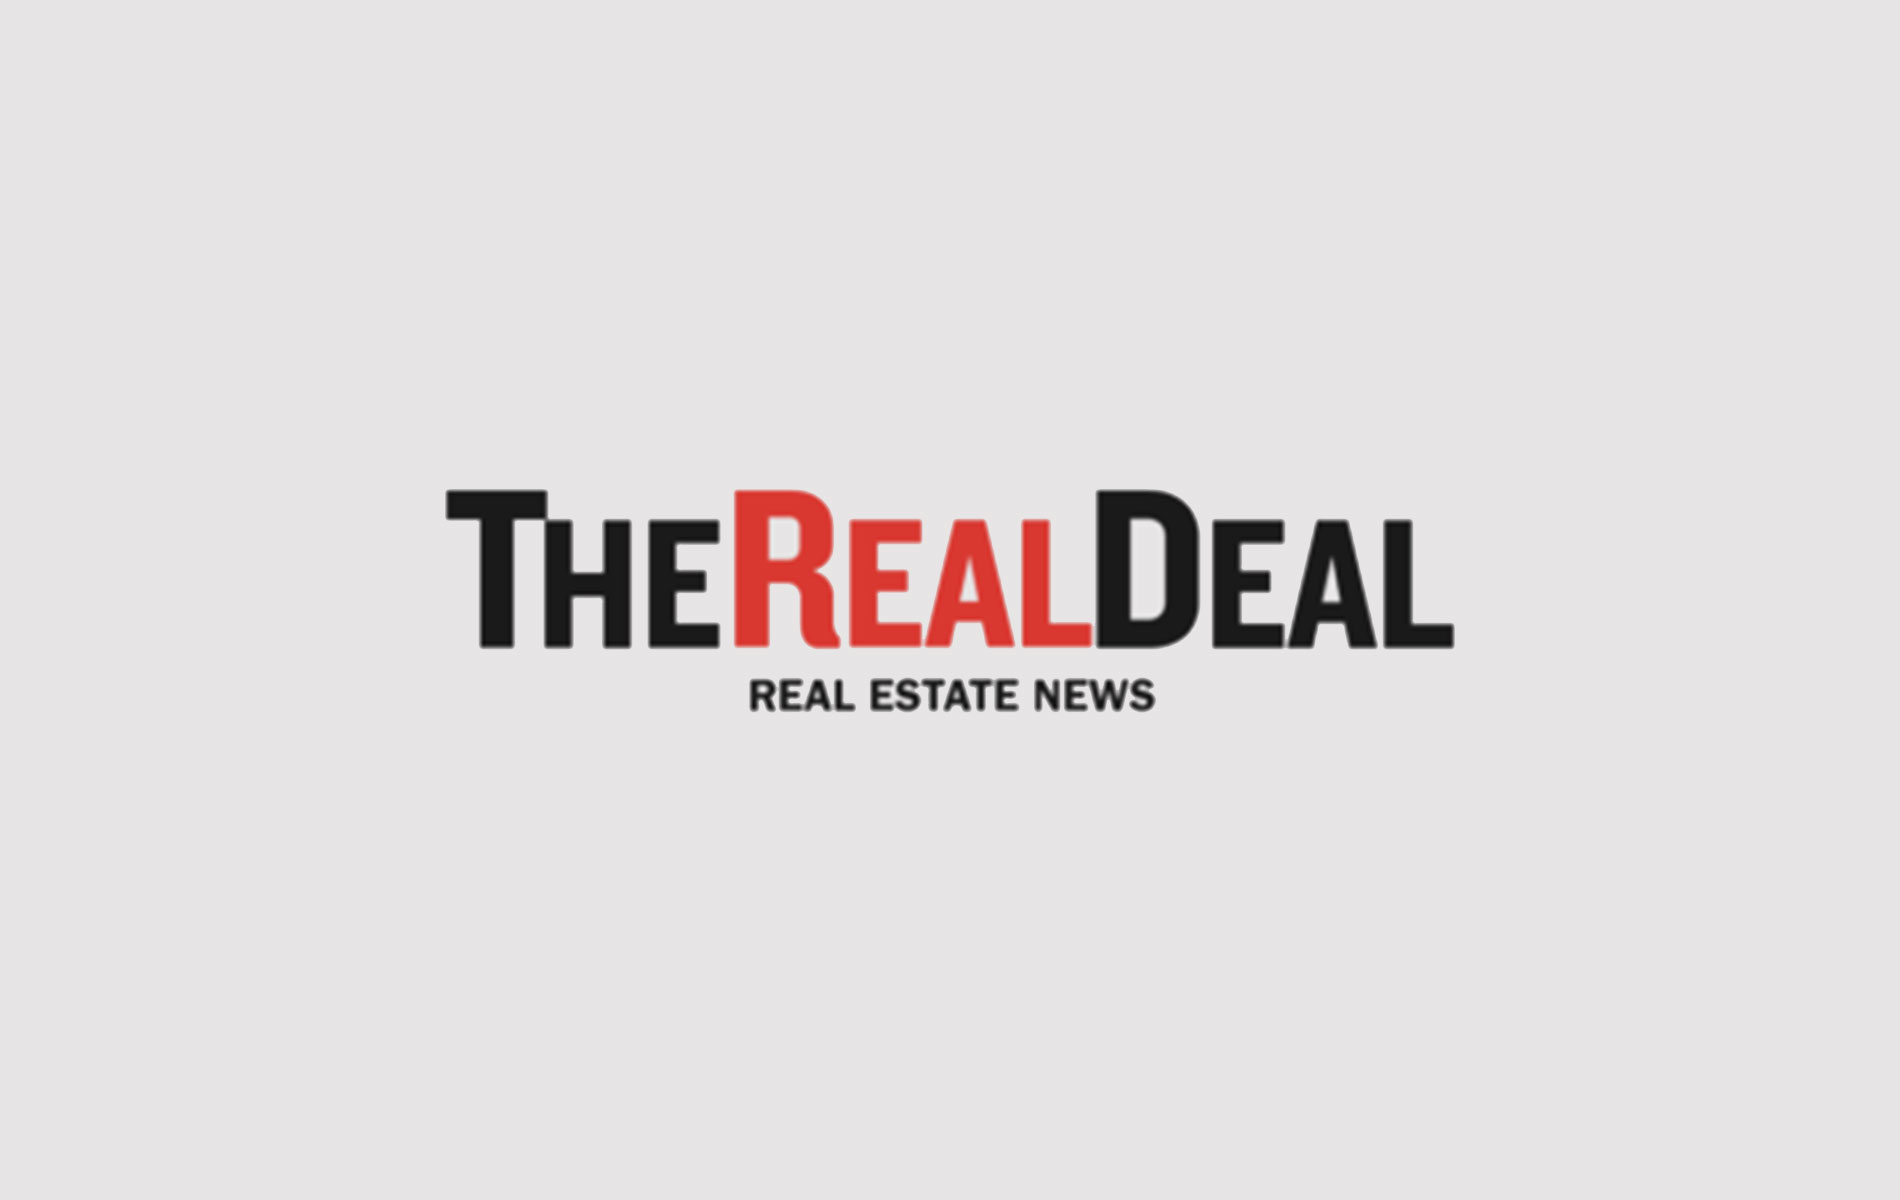 The Real Deal Logo. The word Real is in red. Real Estate News underneath.